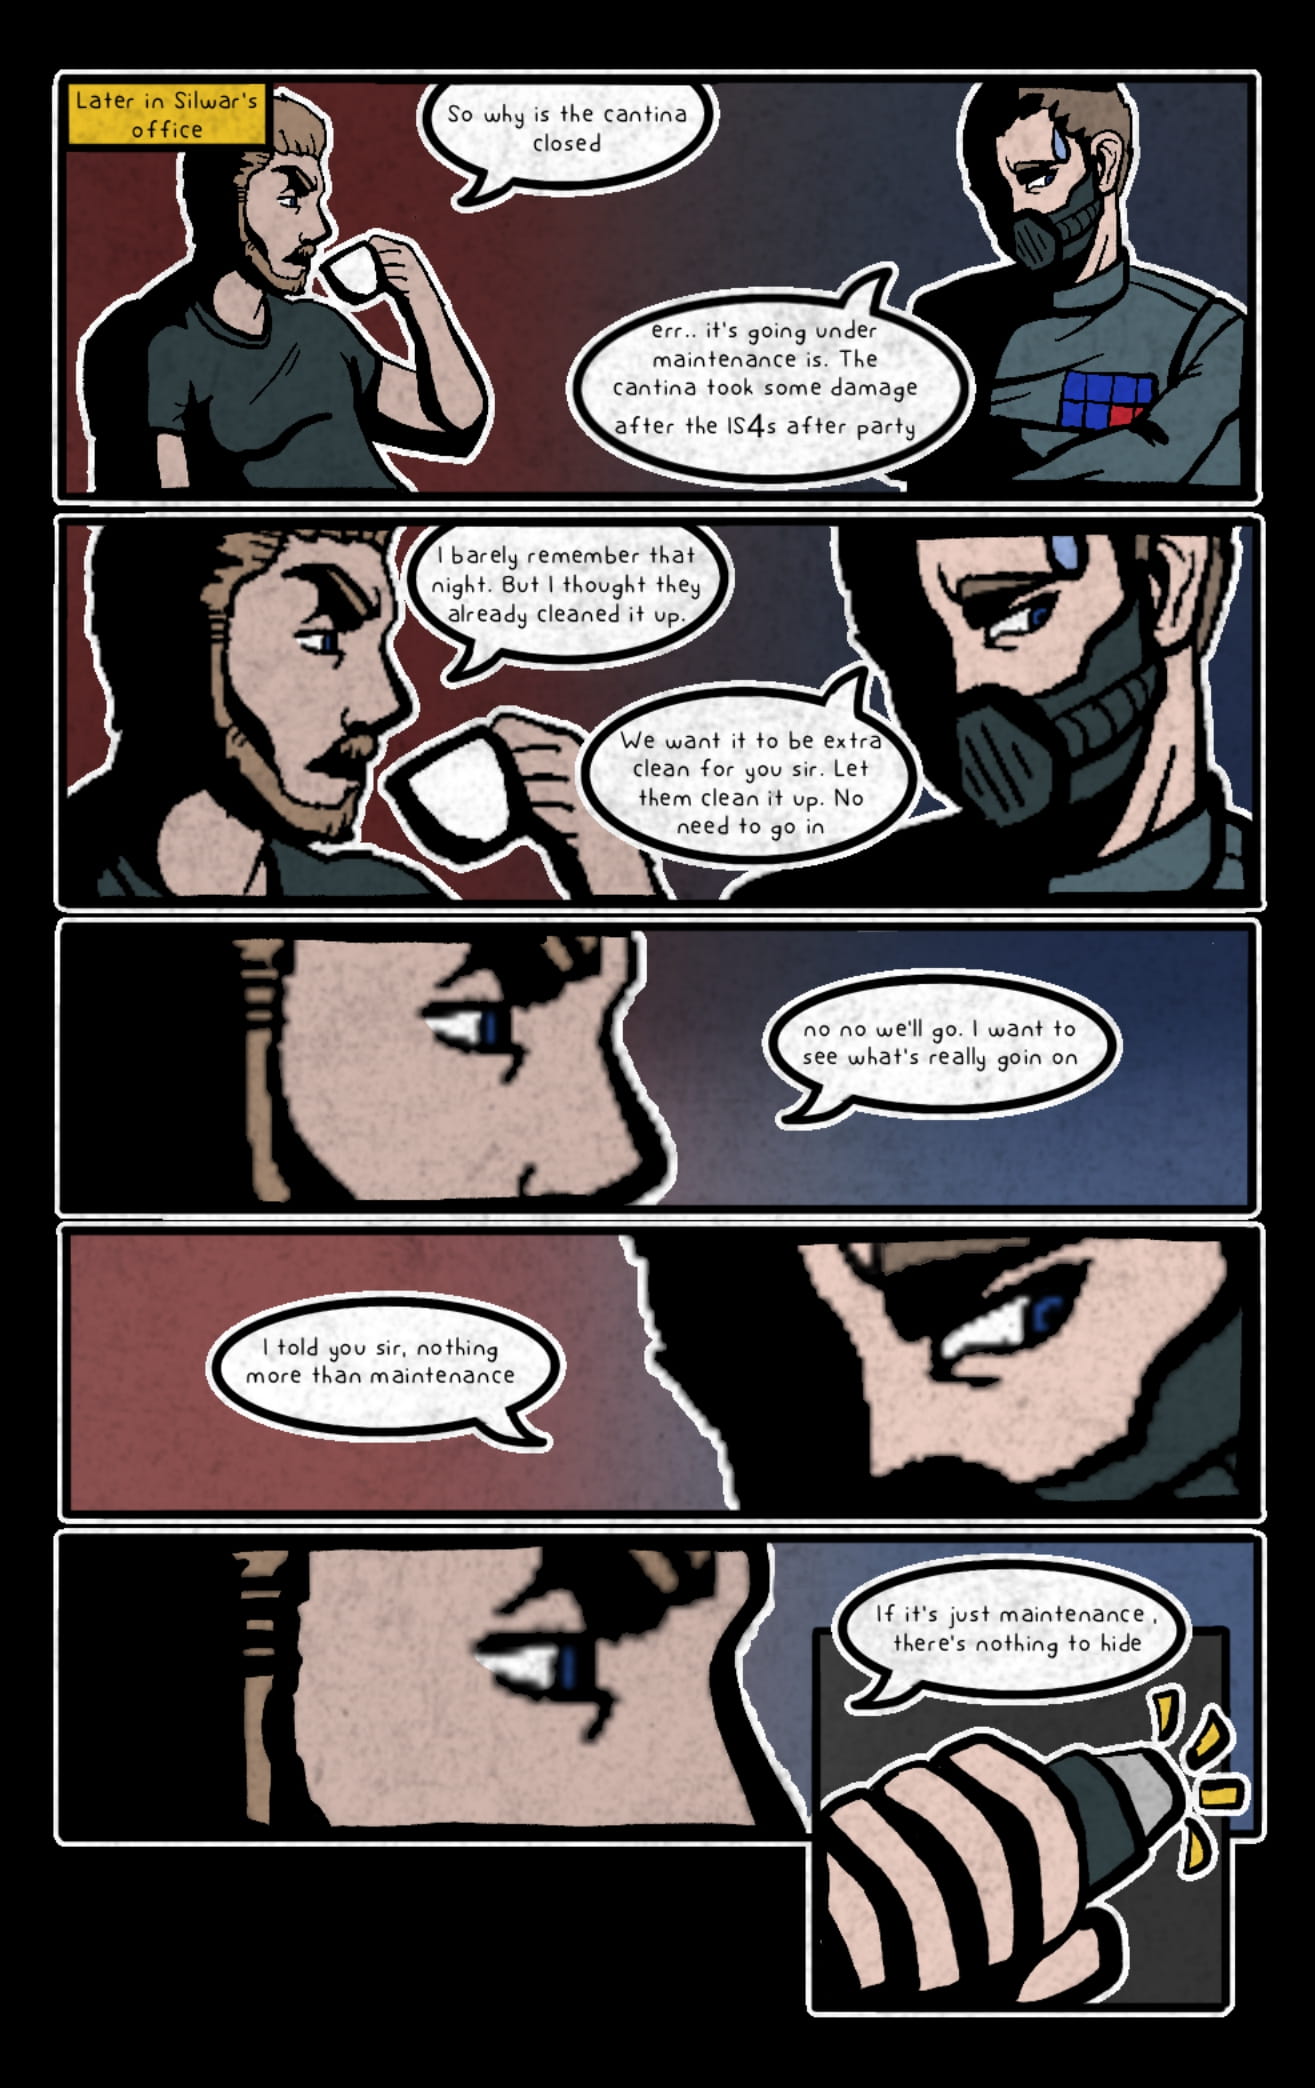 Page 4 of the 'Father's Day Special' comic, available on the EH Wiki.